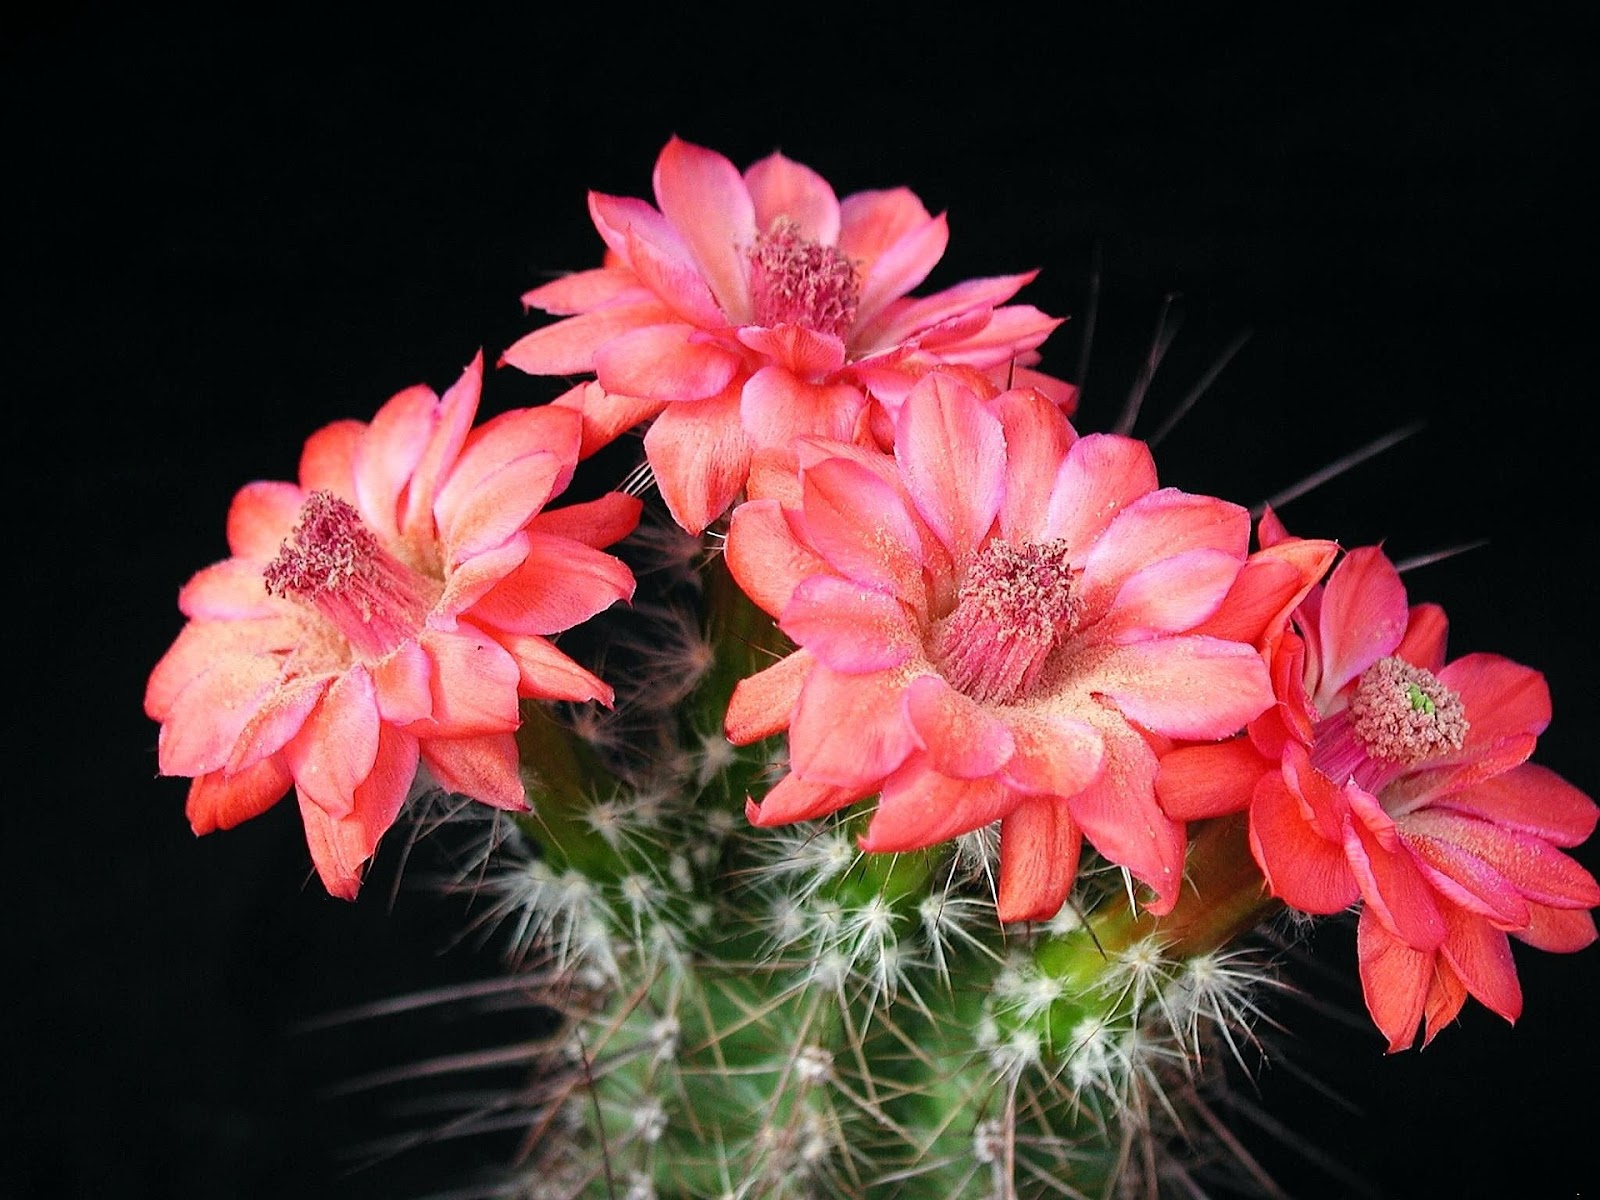 Cactus blooming with pink flowers